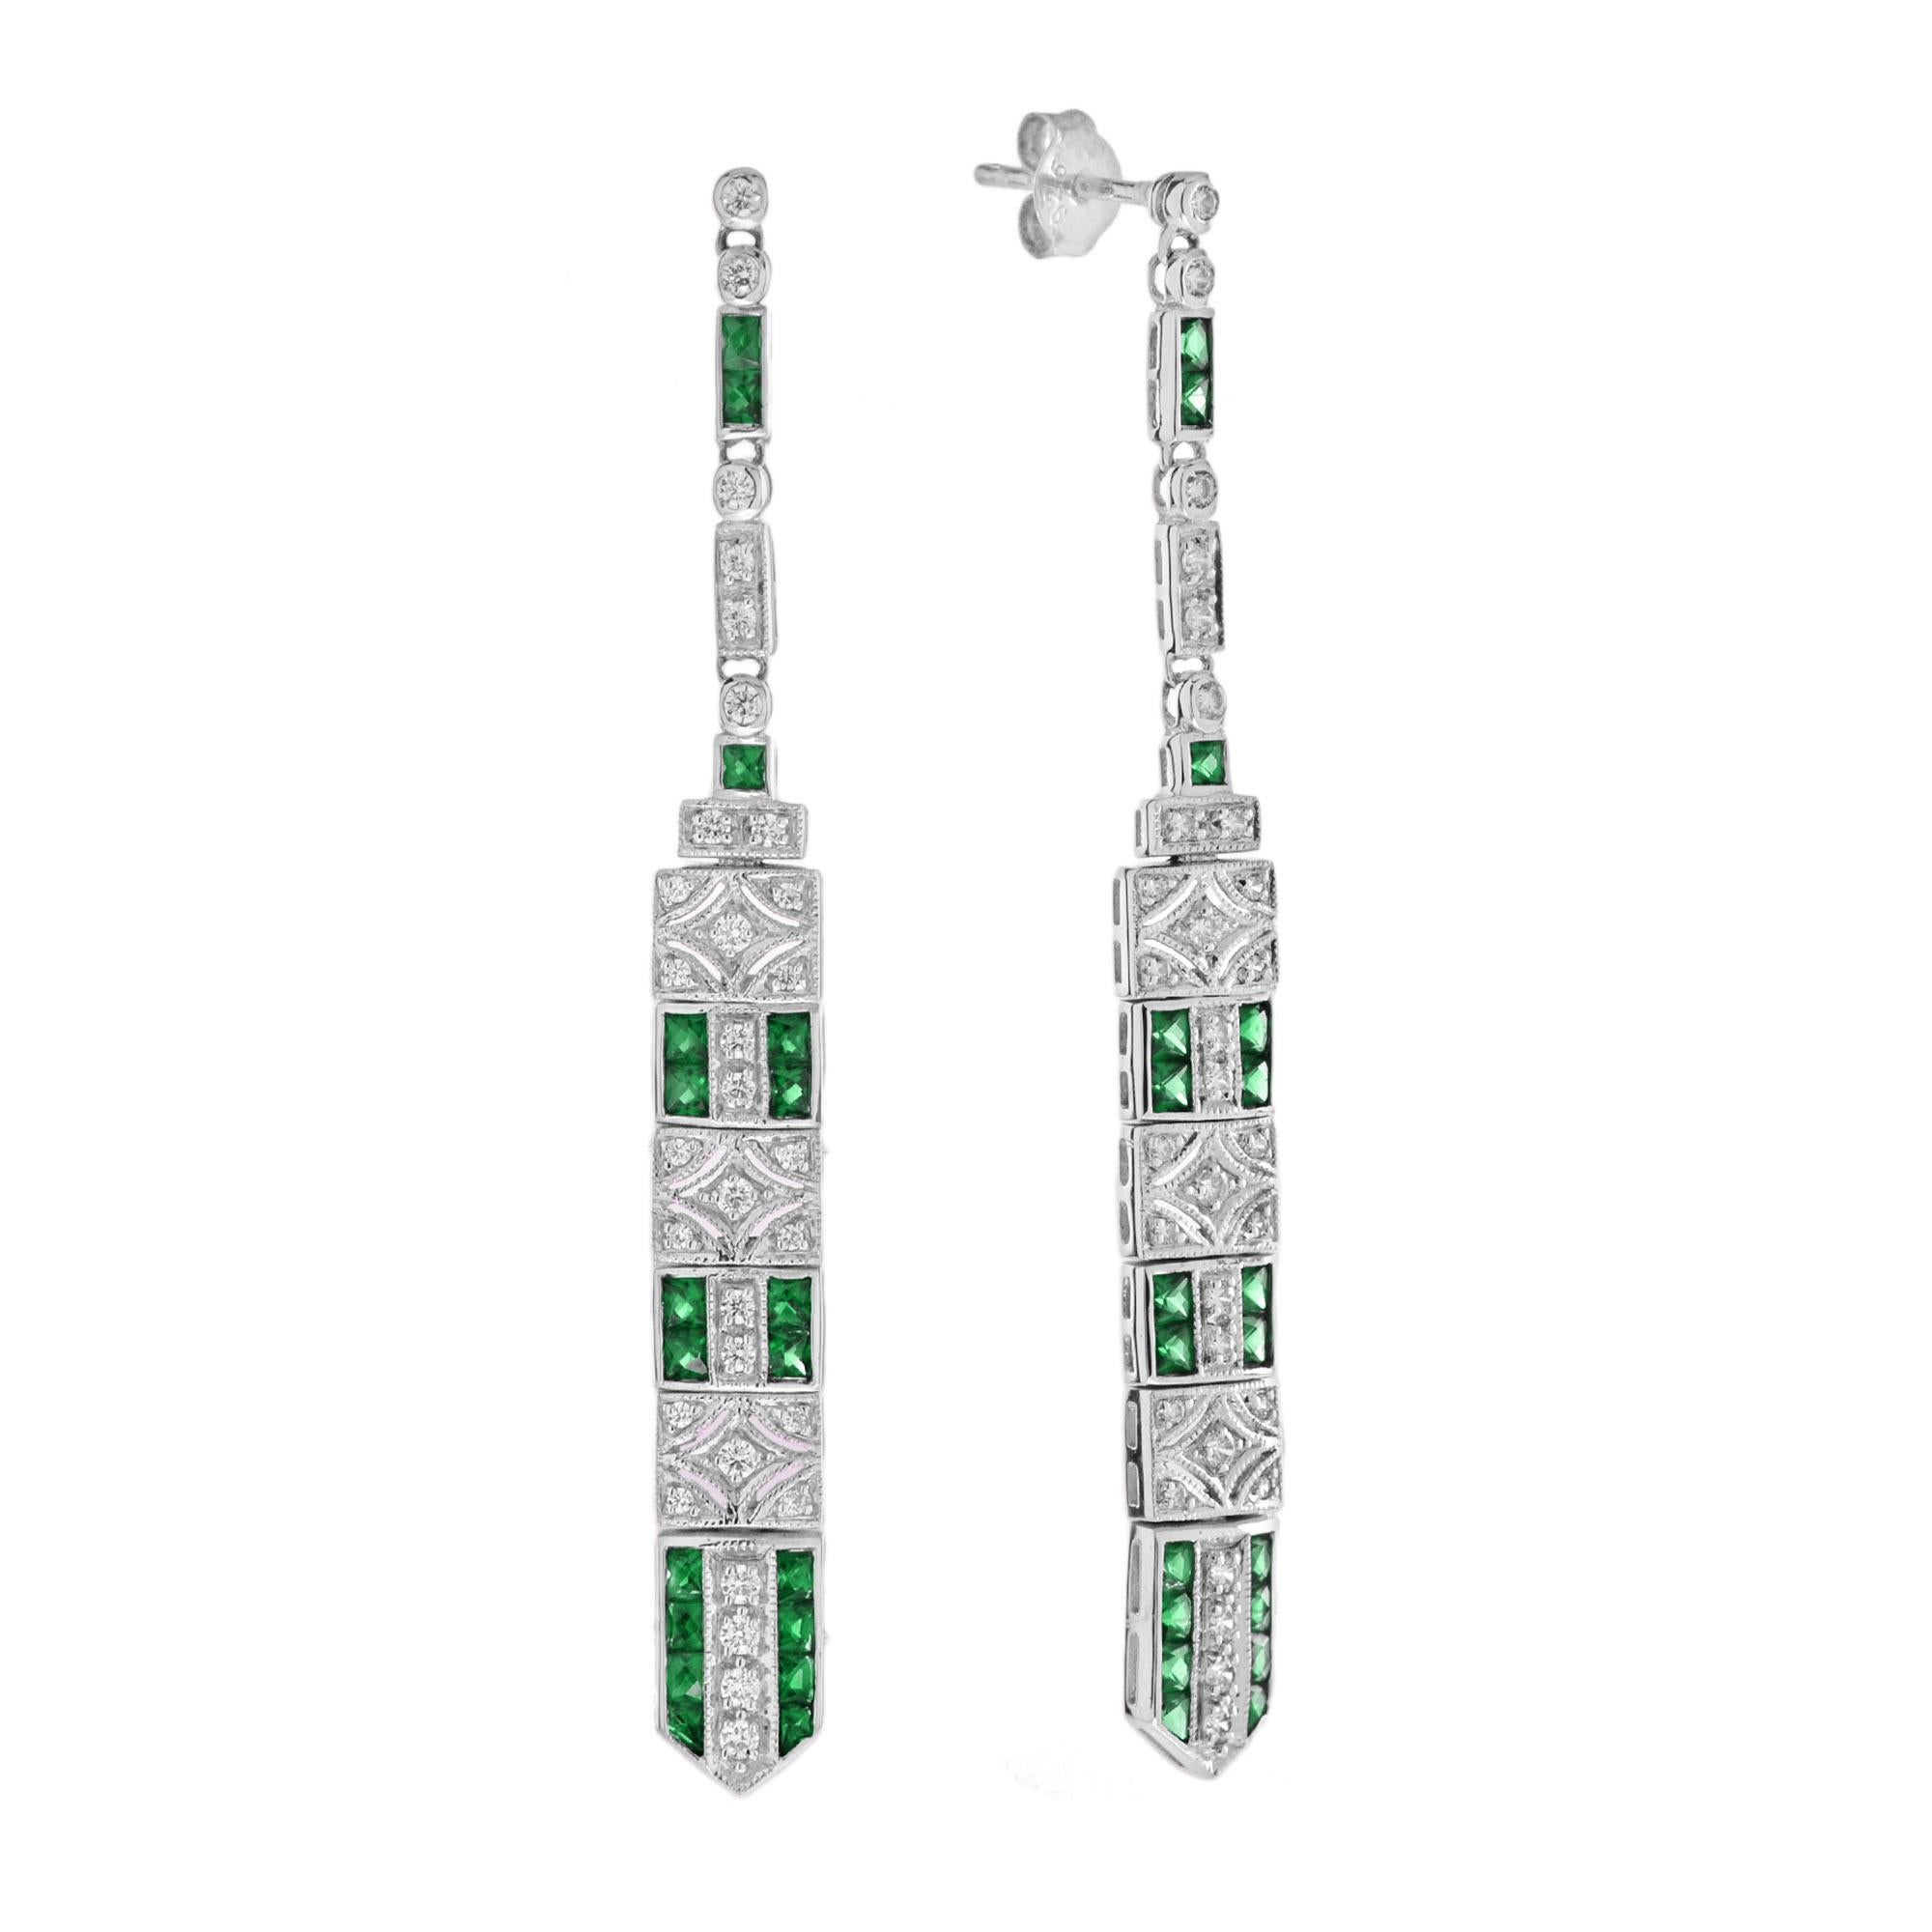 These art deco bar dangle earrings and link bracelet are the epitome of vintage-inspired elegance featuring mesmerizing geometric patterns feature with emerald and diamonds. 

Earrings Information

Metal: 14K White Gold
Width: 6 mm.
Length: 62